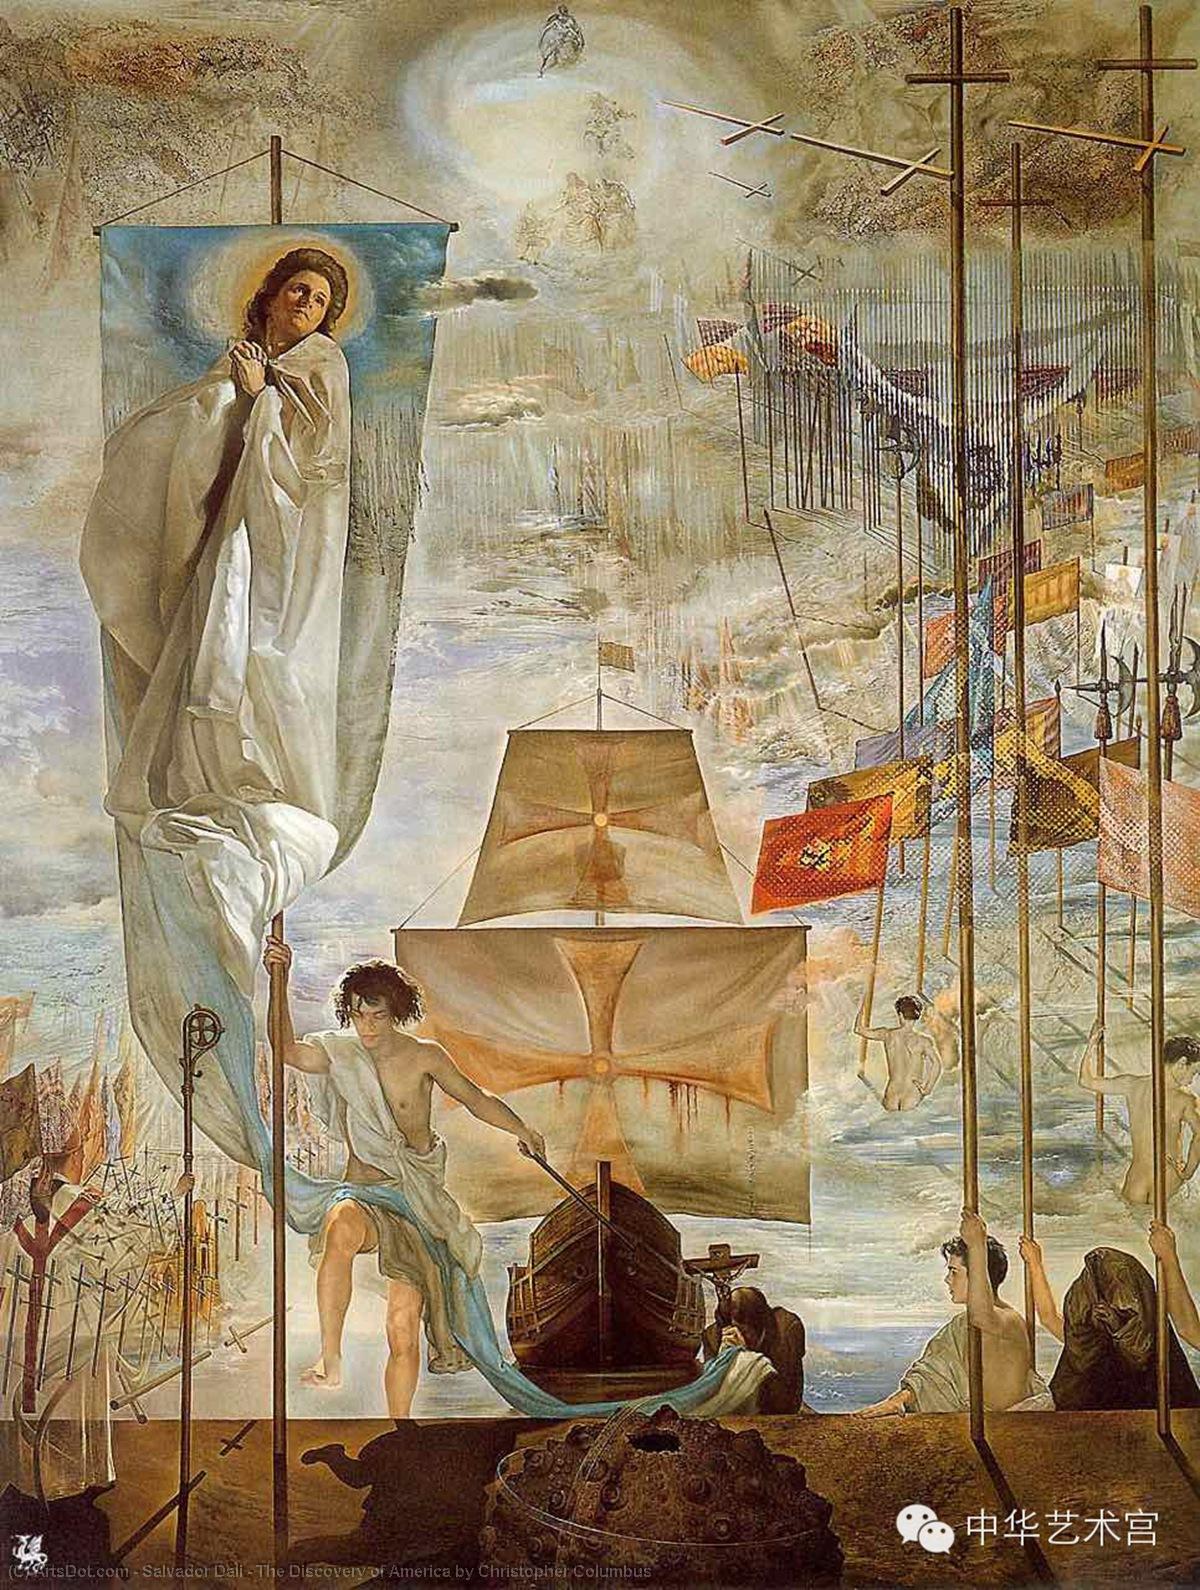 WikiOO.org - Encyclopedia of Fine Arts - Festés, Grafika Salvador Dali - The Discovery of America by Christopher Columbus